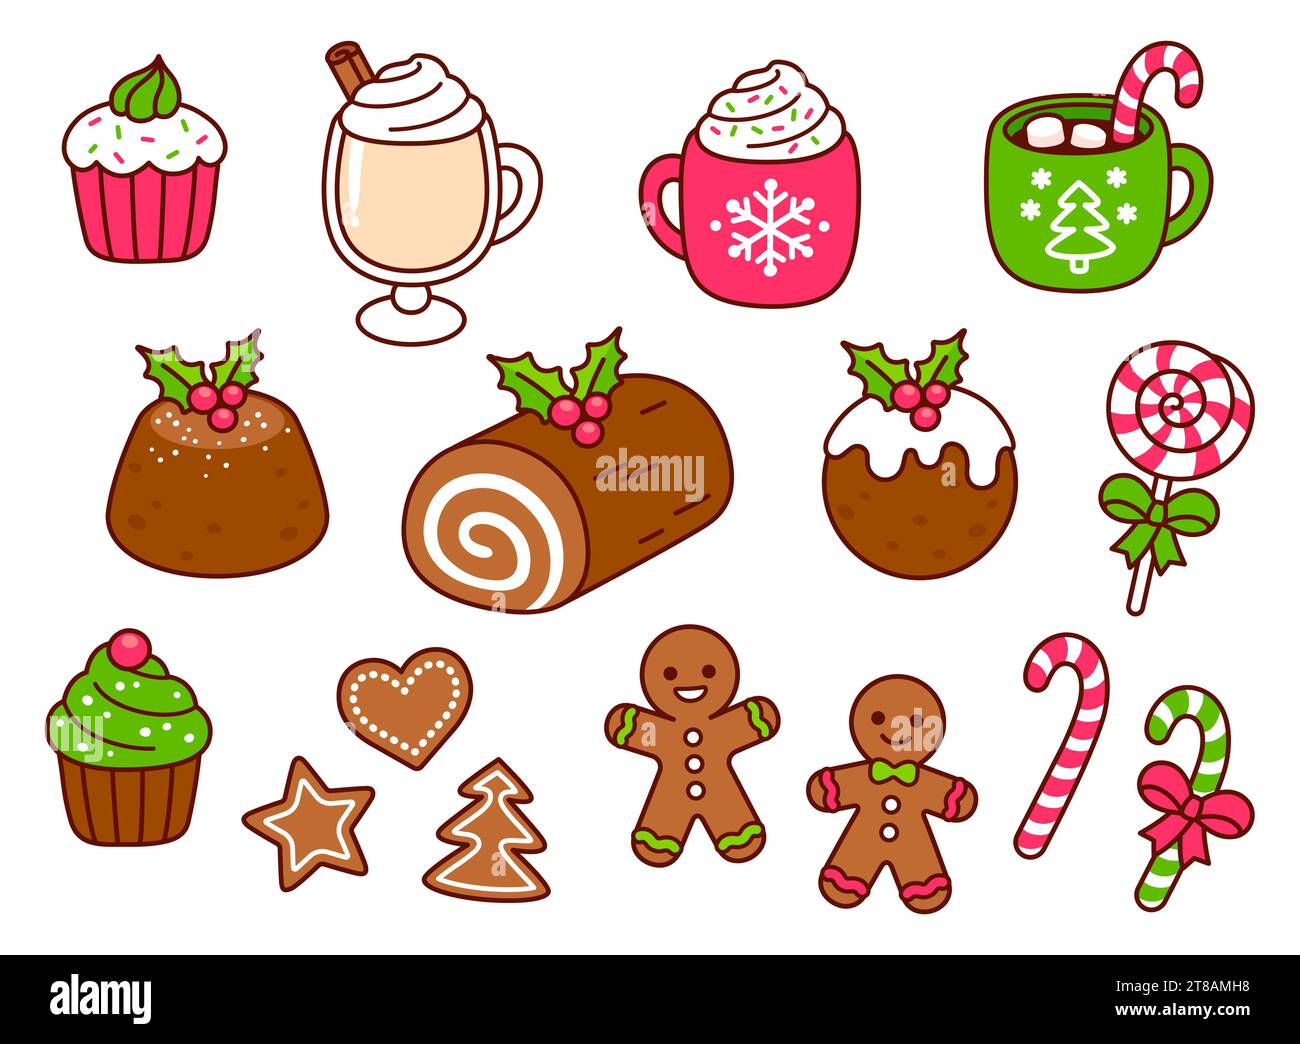 Traditional Christmas food: desserts, drinks, cookies and sweets. Kawaii hand drawn doodles. Cute cartoon vector illustration set. Stock Vector